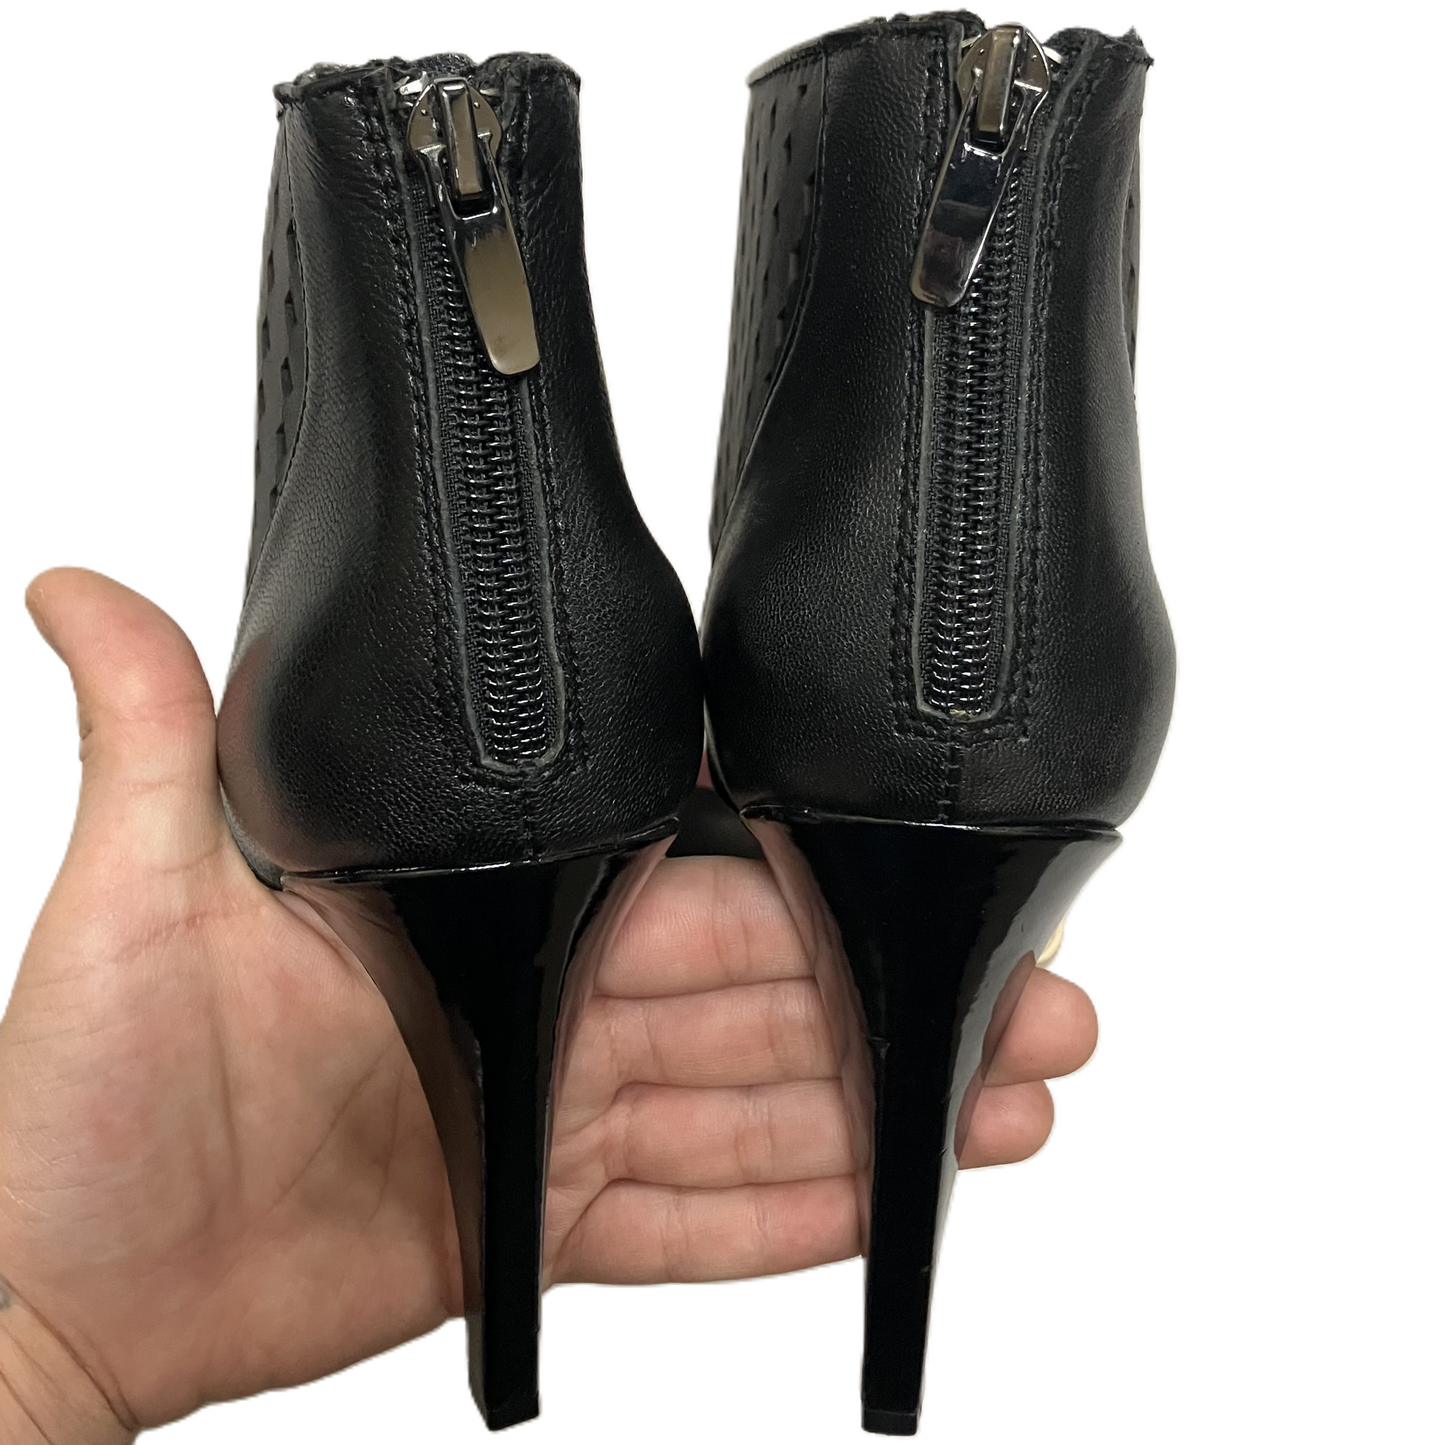 Shoes Heels Stiletto By Taylor Says  Size: 9